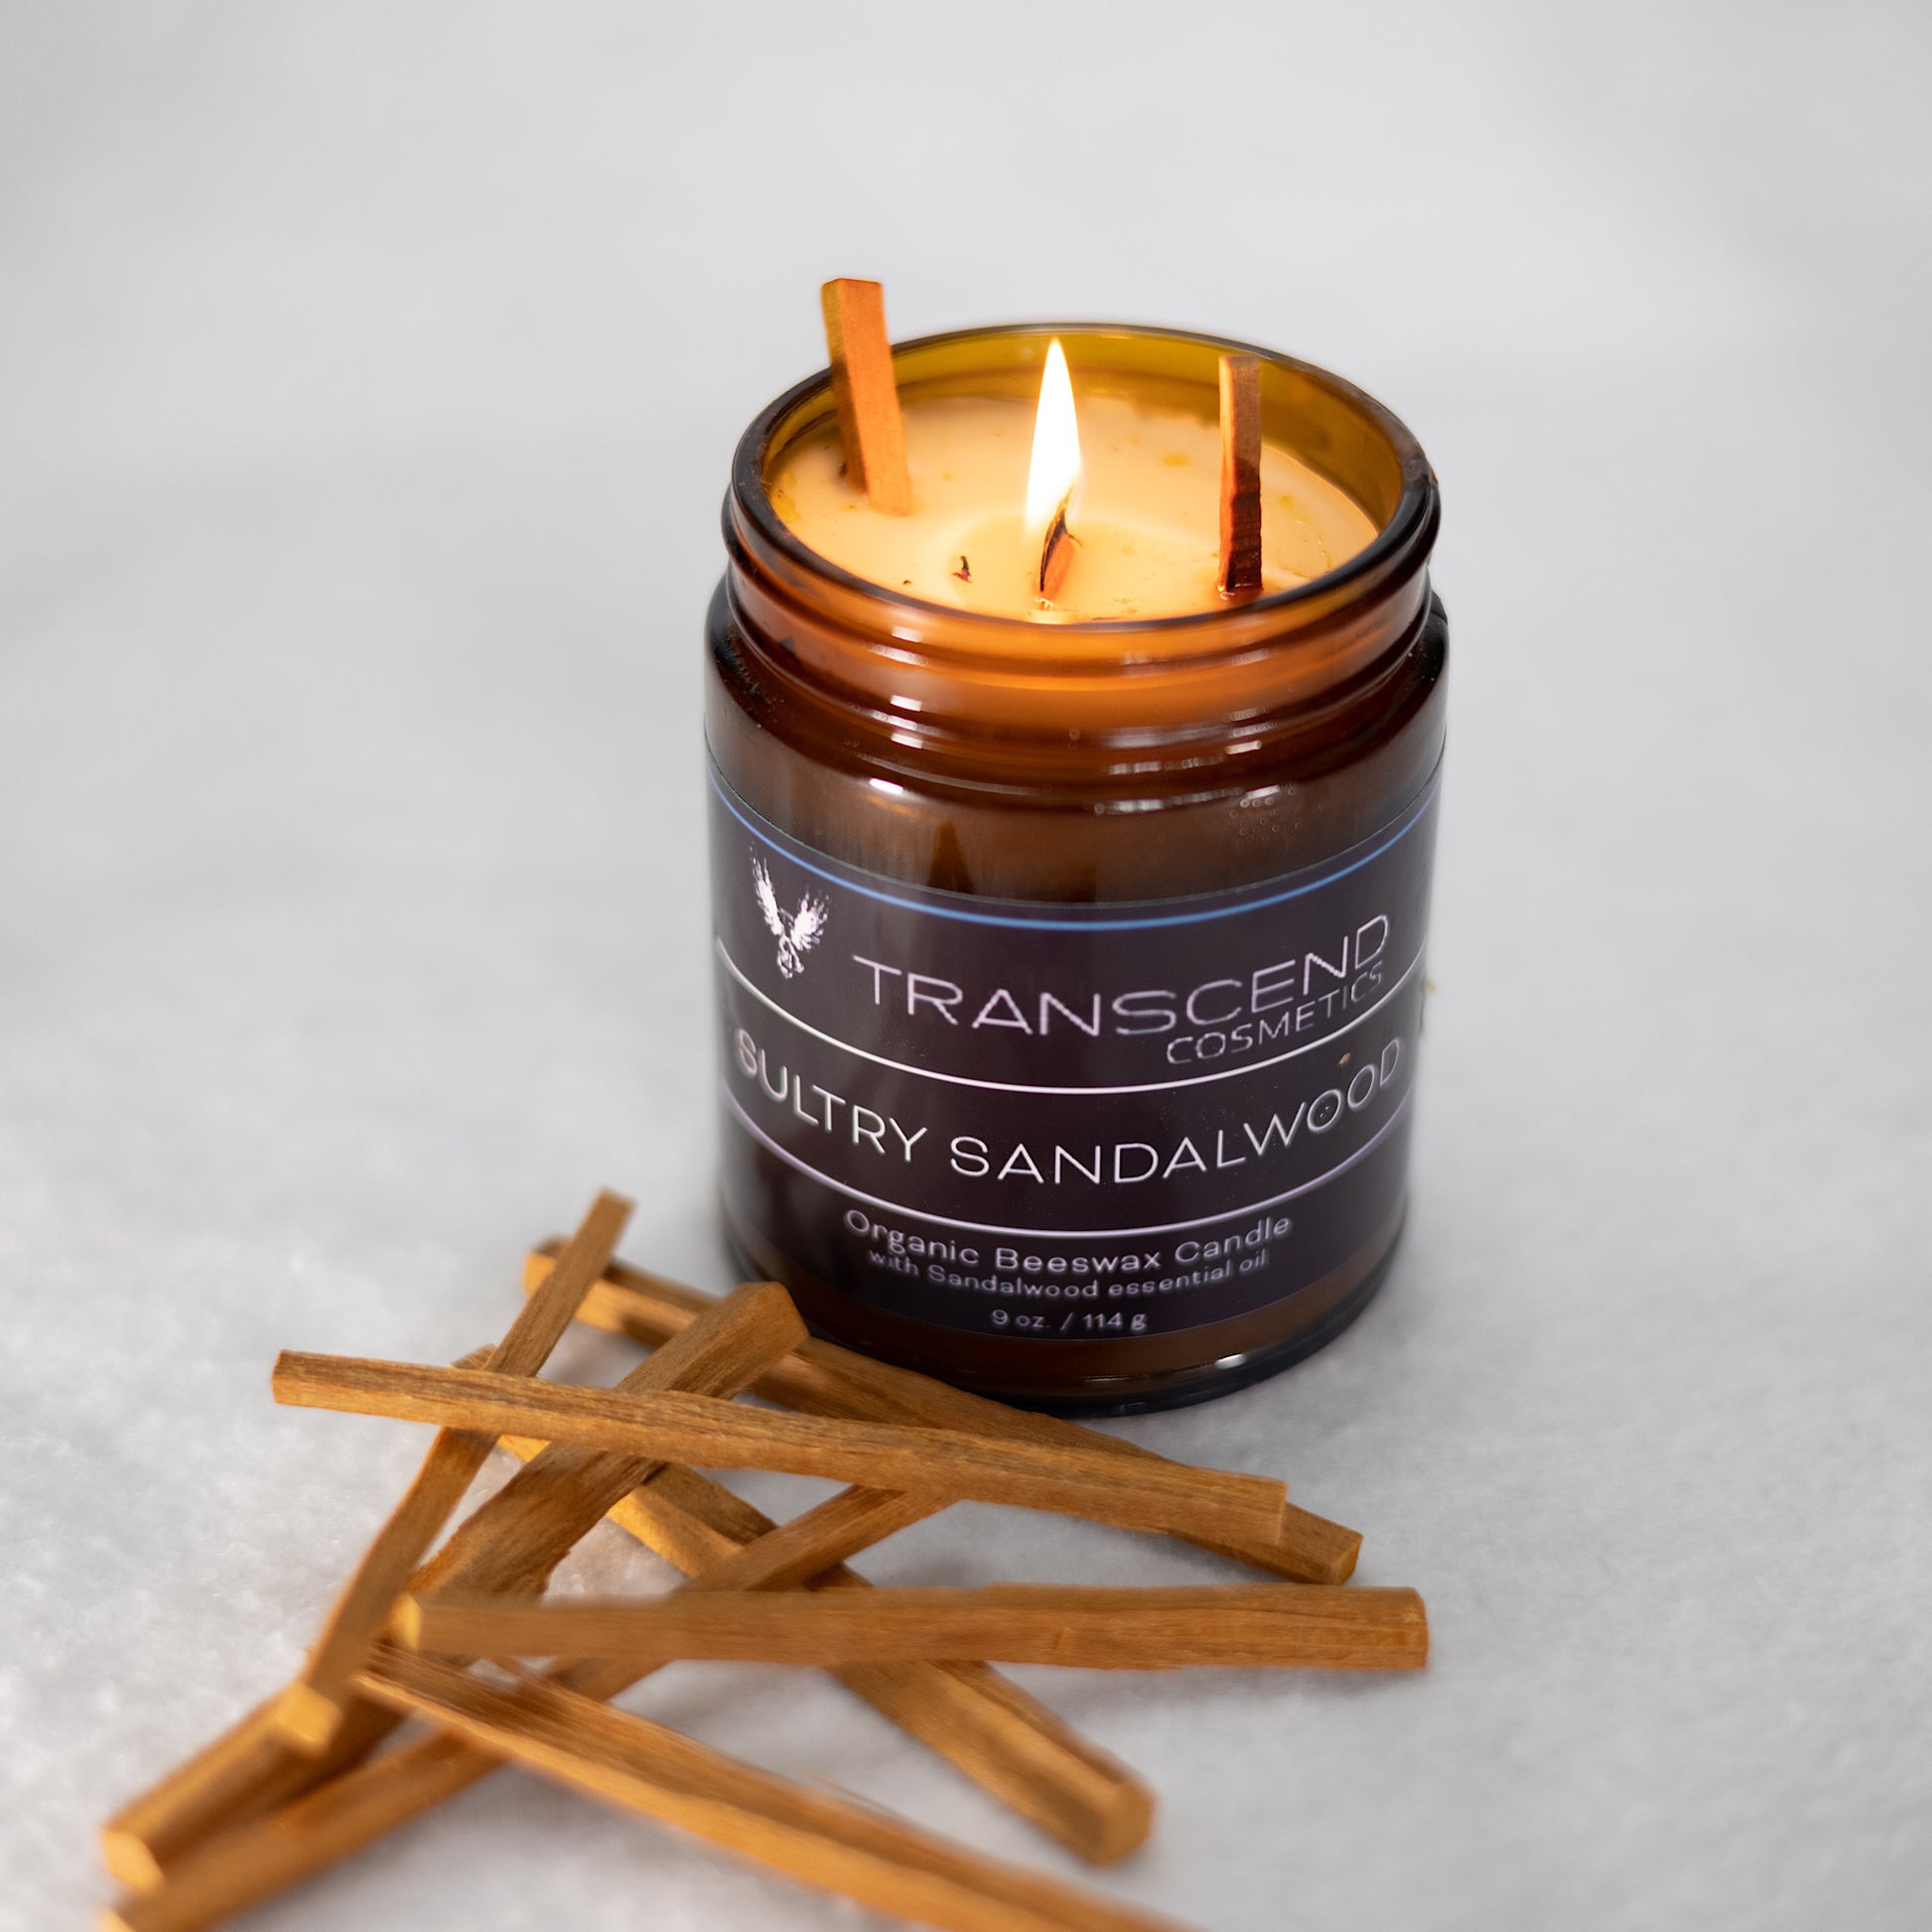 organic candle, transcend cosmetics candle, transcend cosmetics, transcend cosmetics beeswax candle,essential oil, essential oil candle, candle, beeswax candle, sandalwood candle, sultry sandalwood candle, sultry sandalwood, sandalwood candles, sandalwood sticks, sandalwood essential oil, essential oils